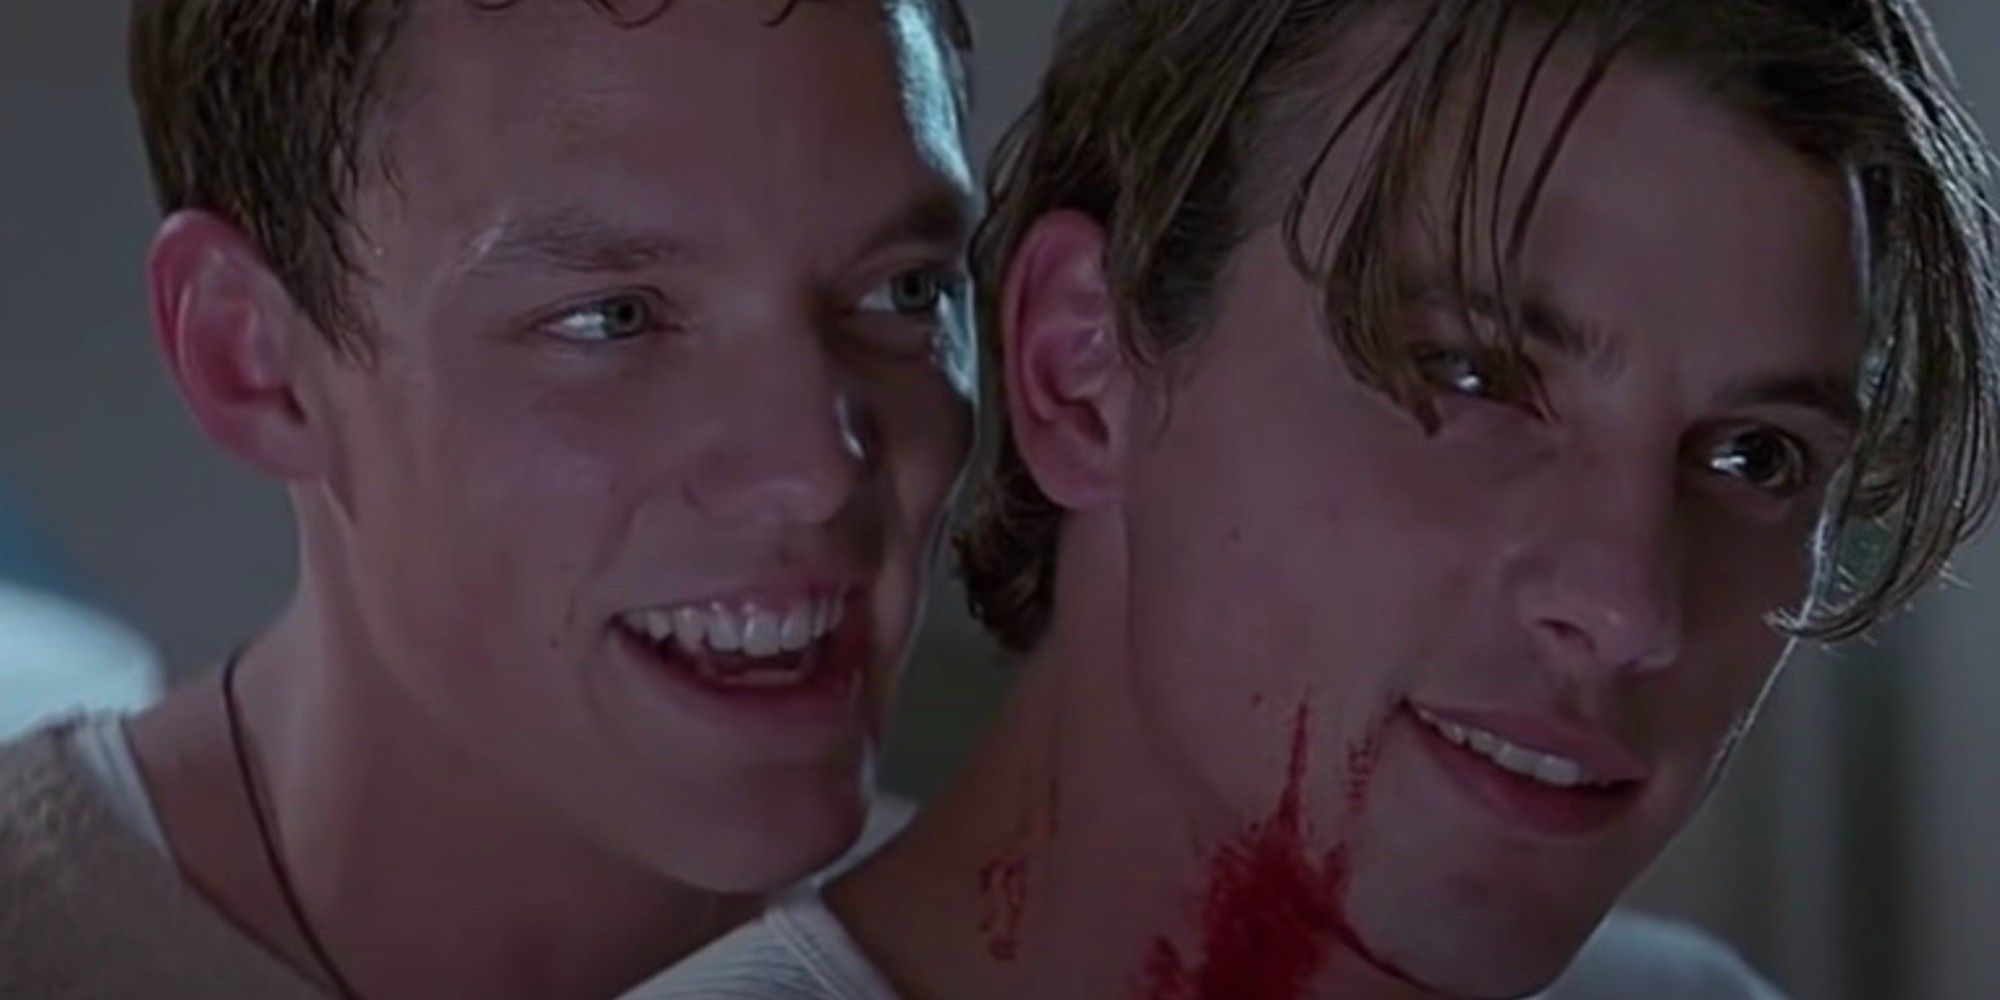 Stu and Billy smiling creepily in Scream